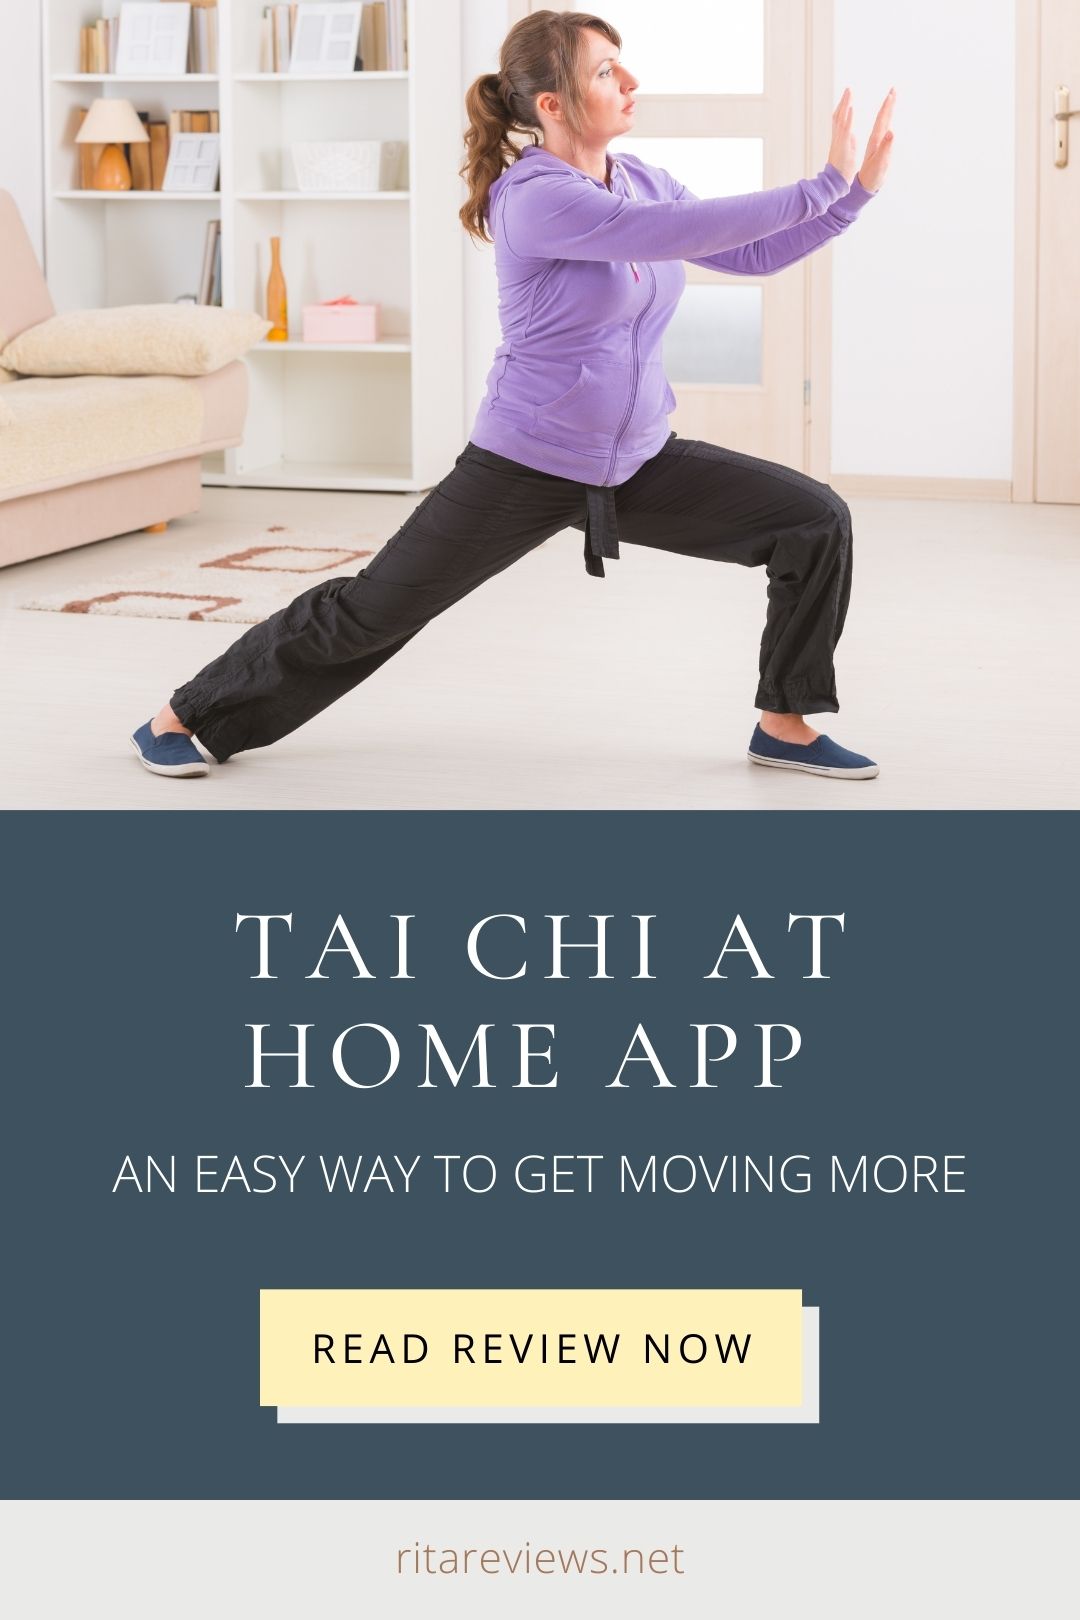 Tai Chi at Home App helps you get moving and adds flexibility all from the comfort of your own home. 